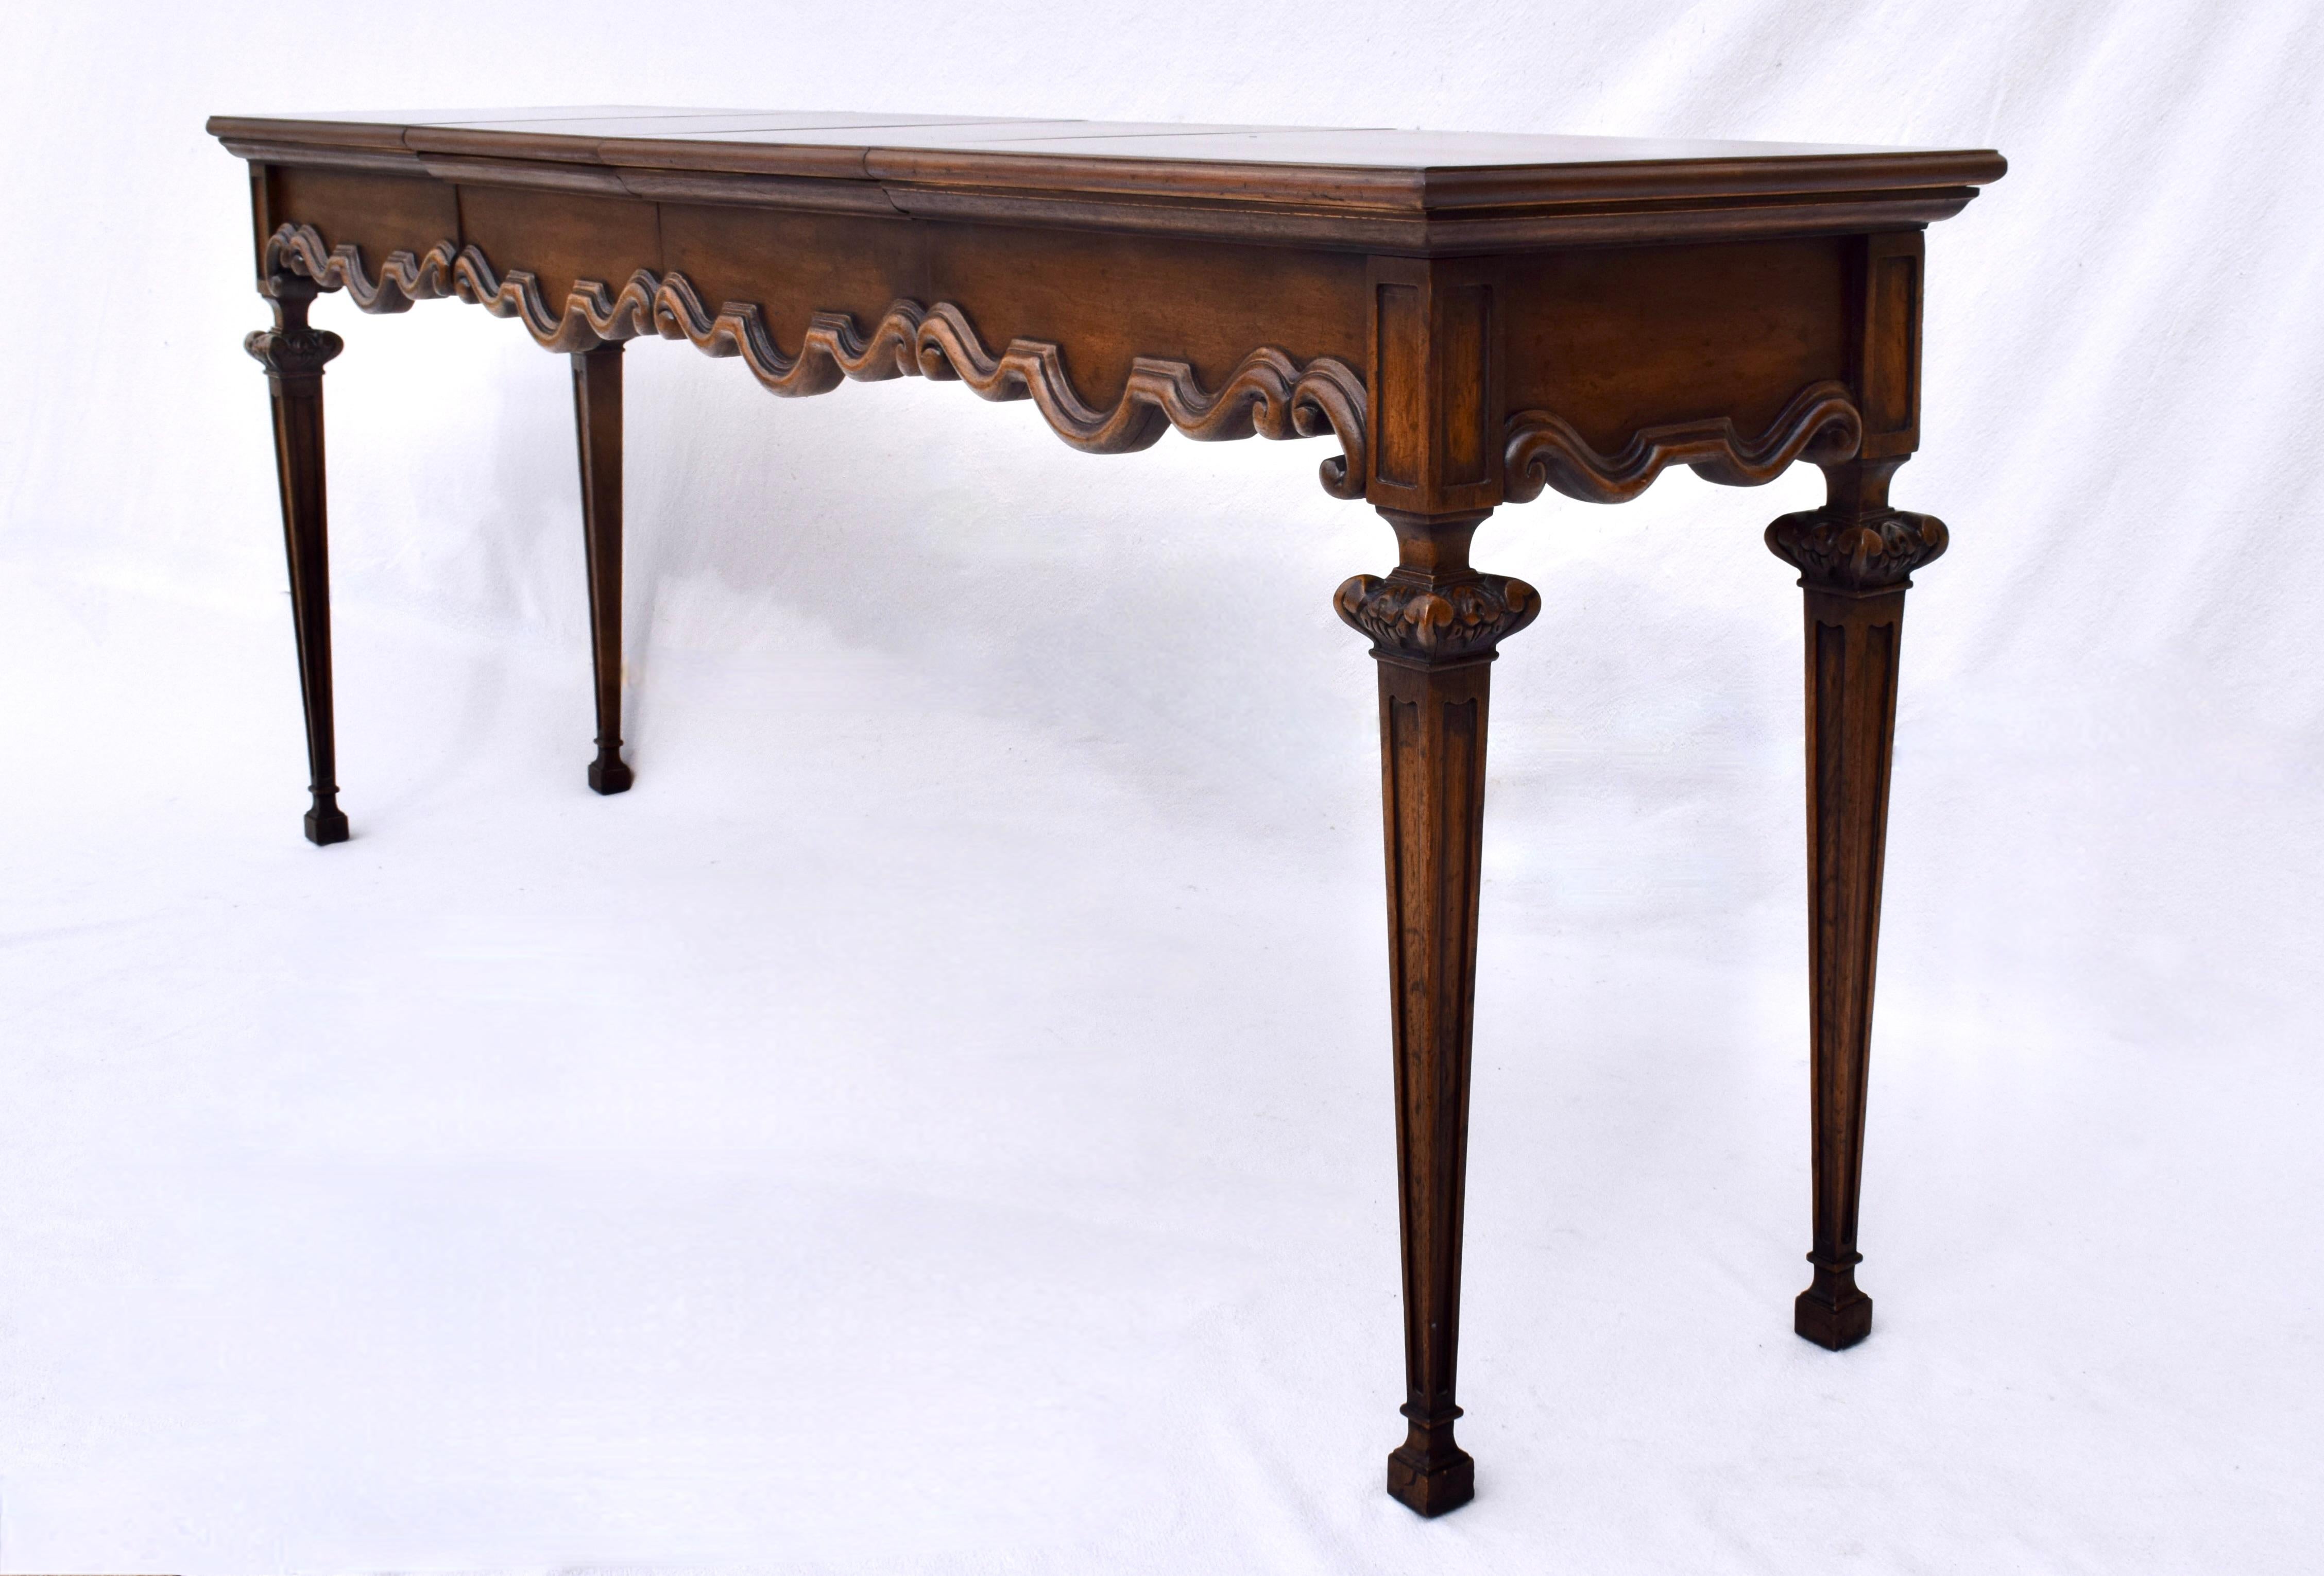 Neoclassical Revival Italian Neoclassical Style Console Table